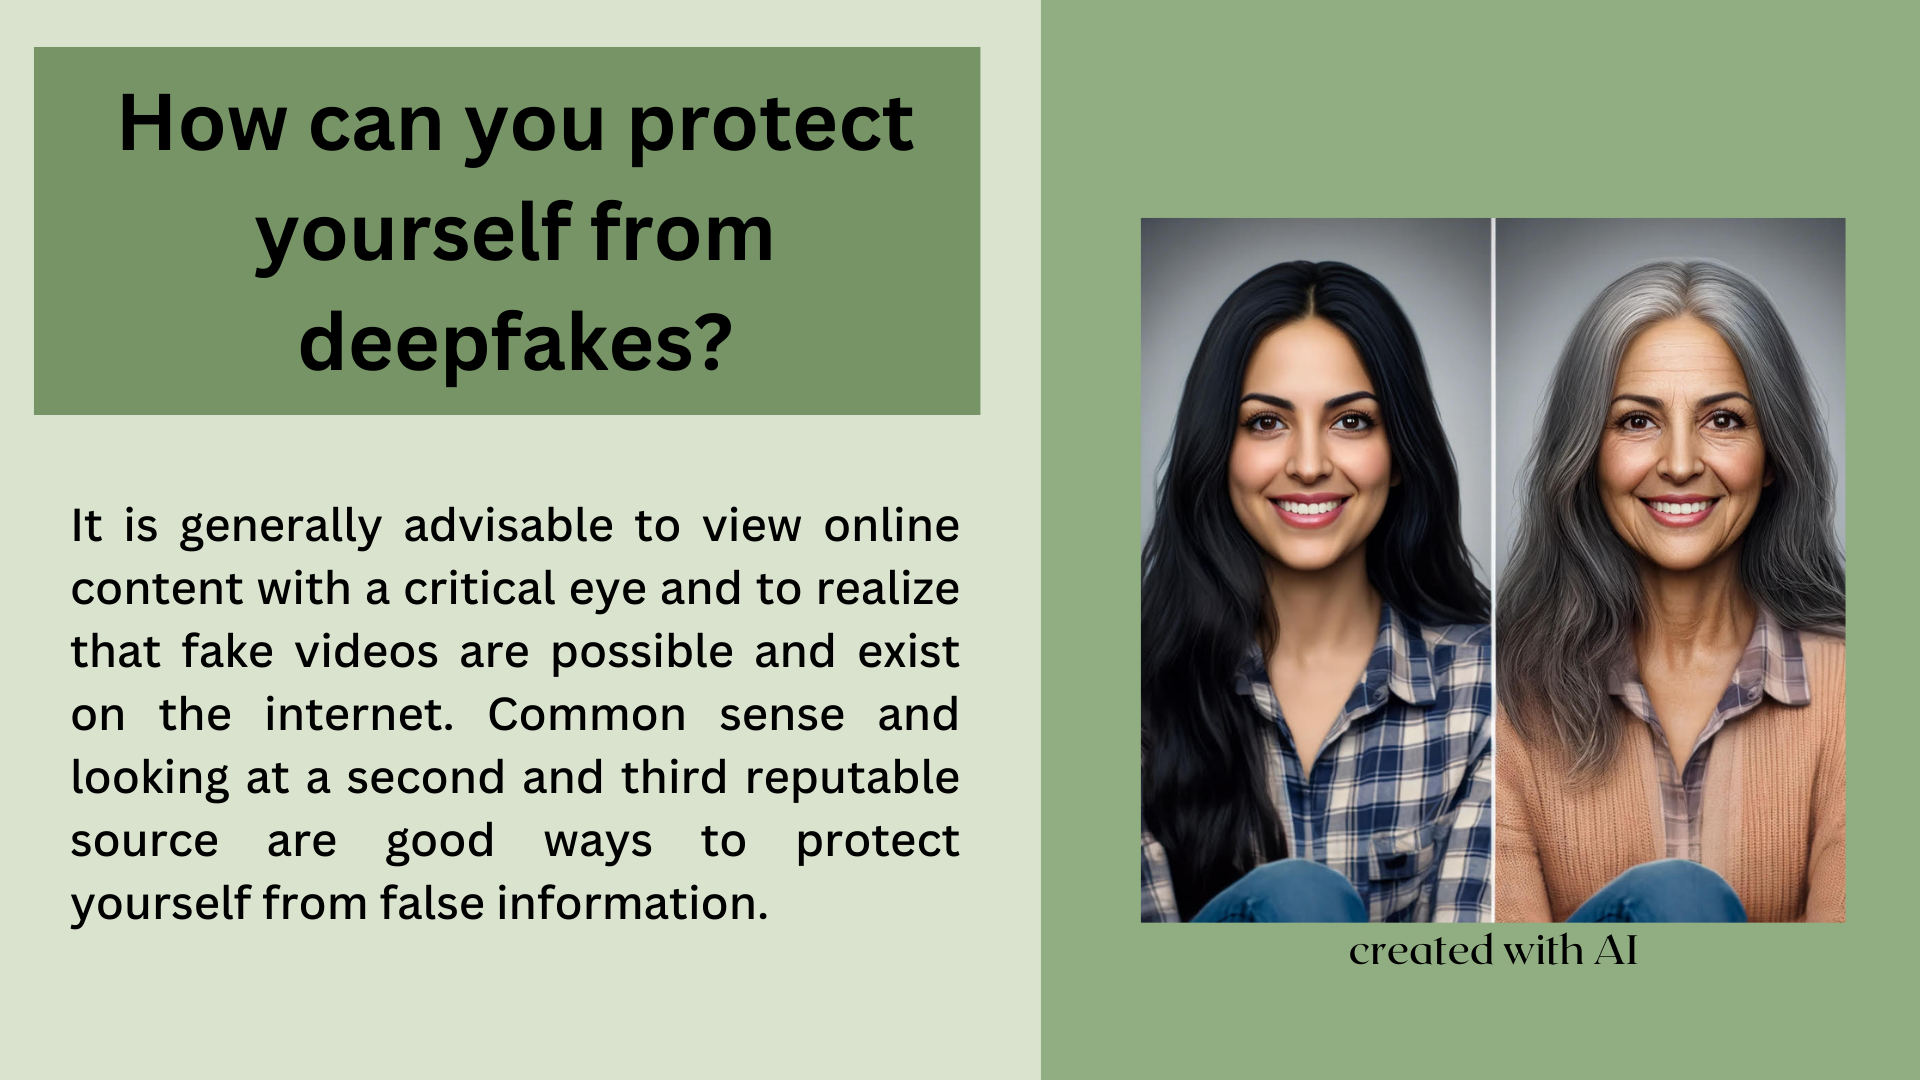 uploads/6688/how_can_you_protect_yourself_from_deepfakes.png